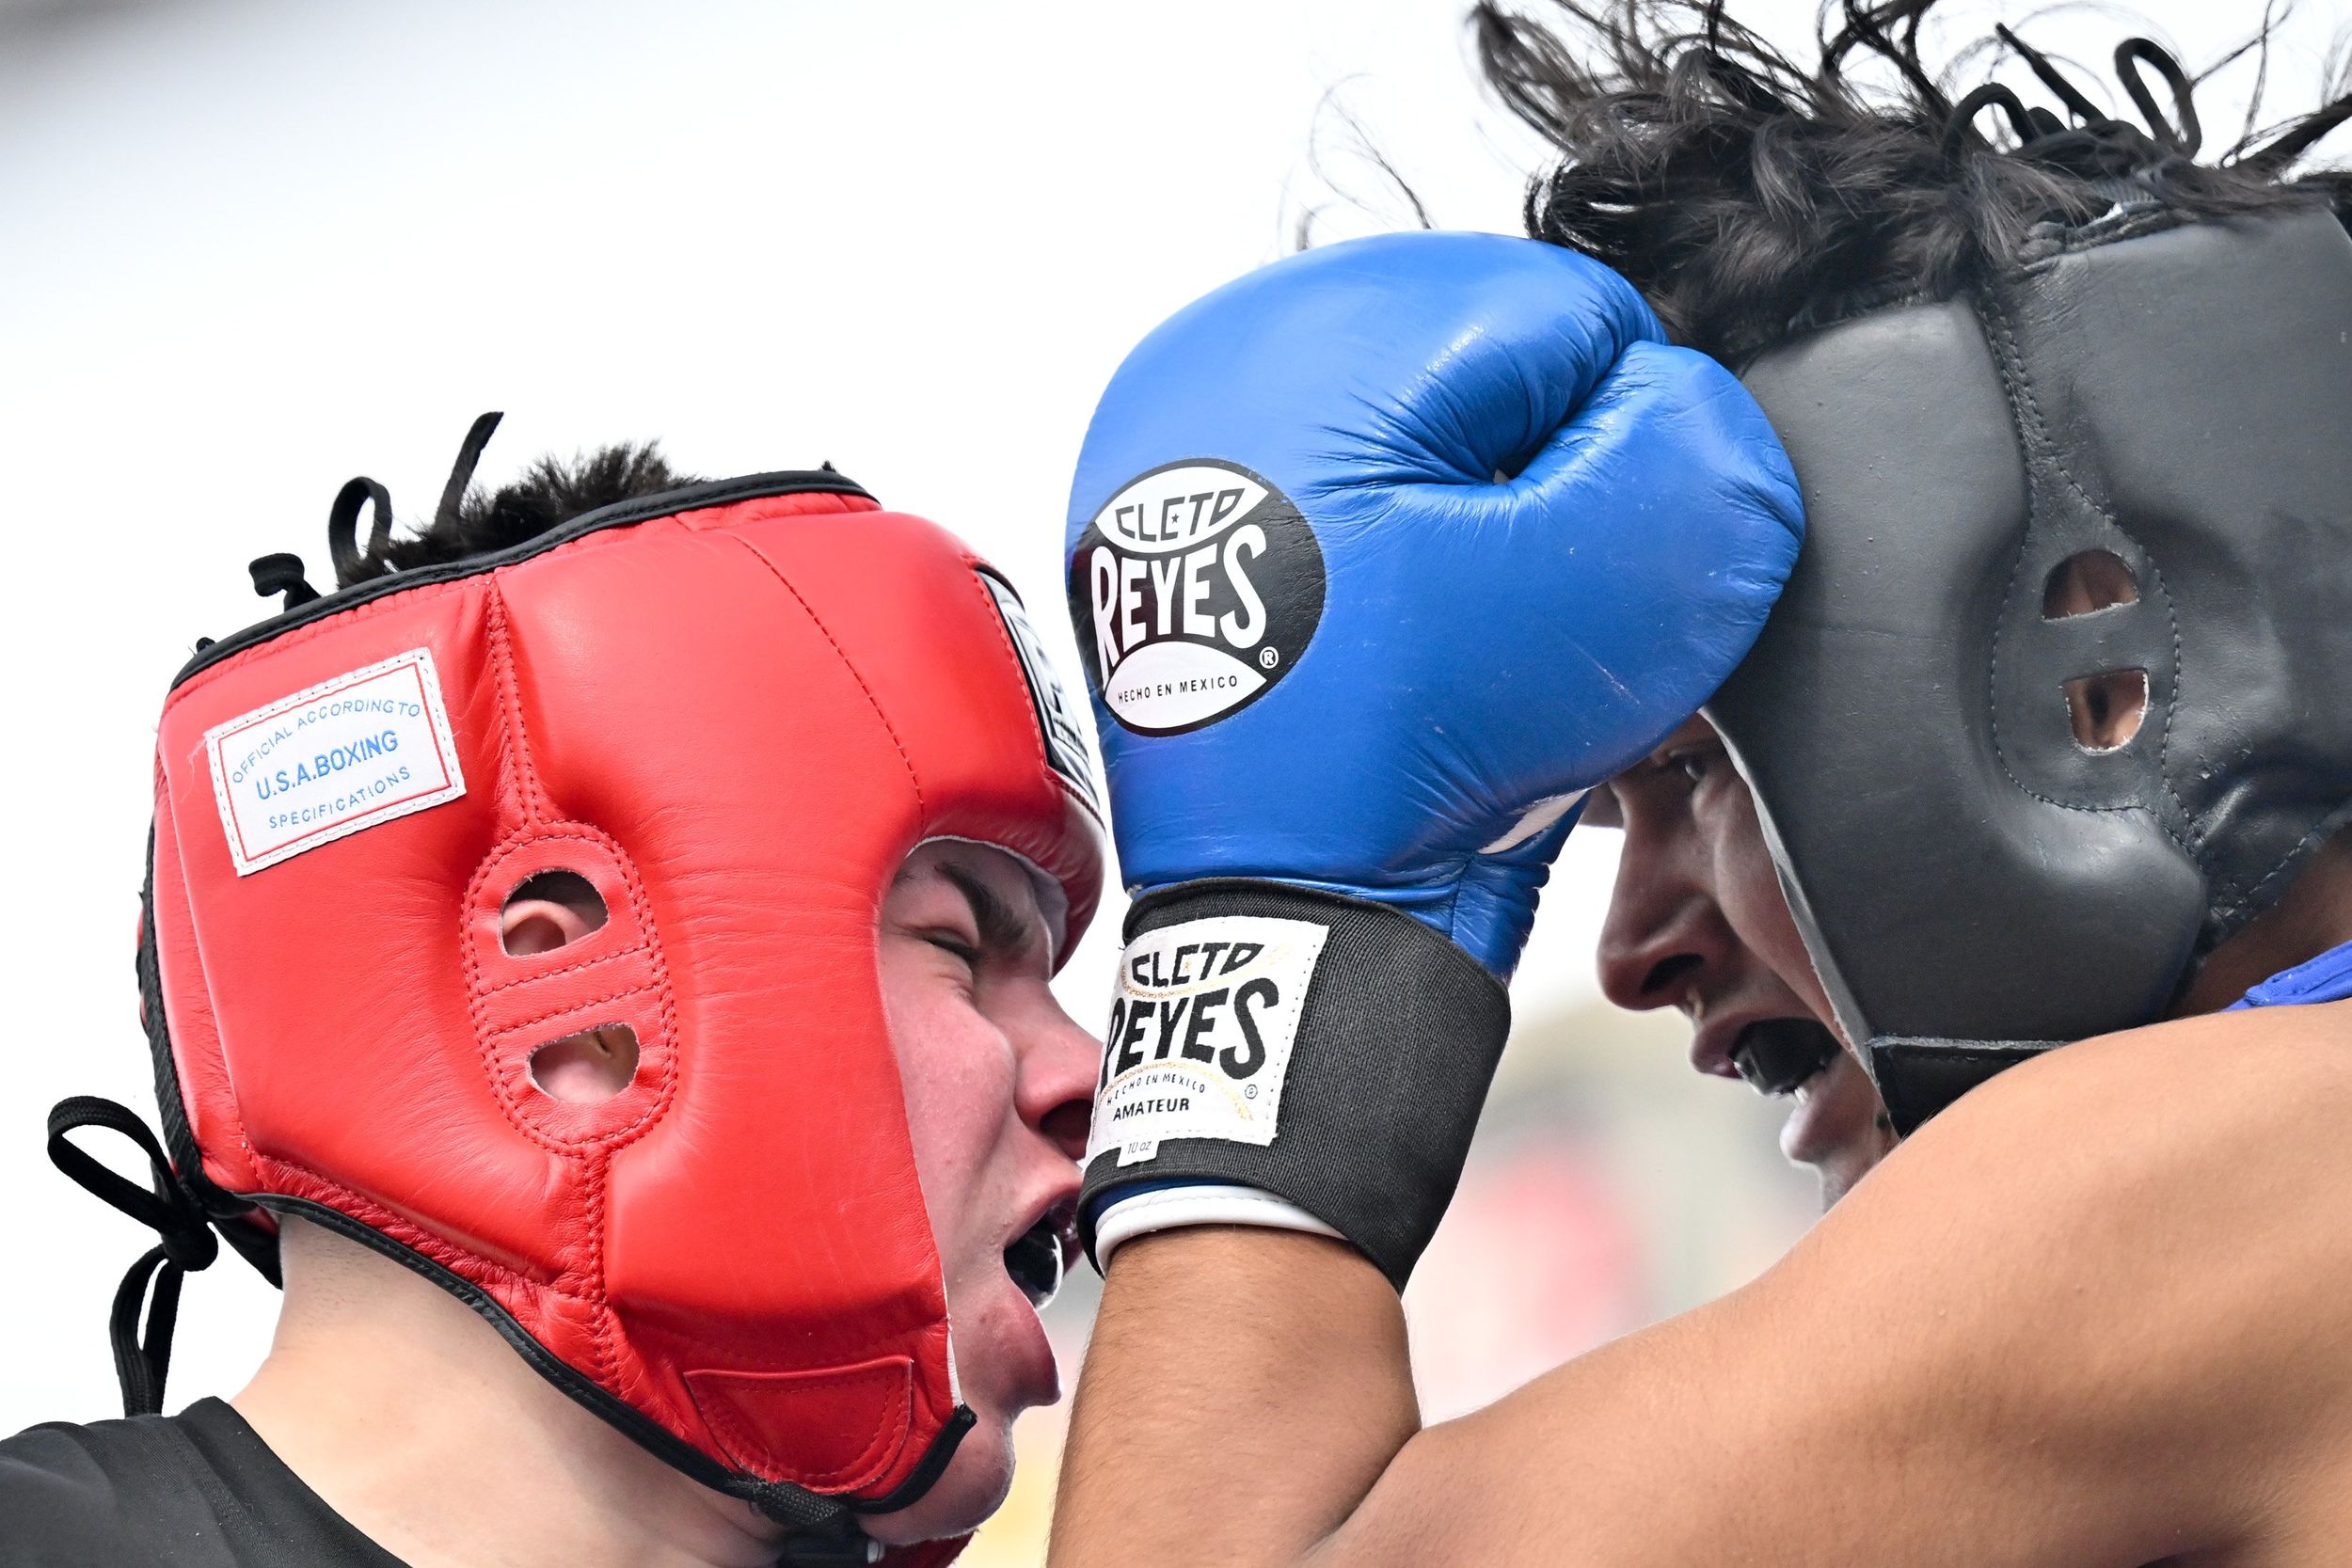 Local food industry workers are getting ready for Spokane's first  Bartenders Brawl boxing match, Food News, Spokane, The Pacific Northwest  Inlander